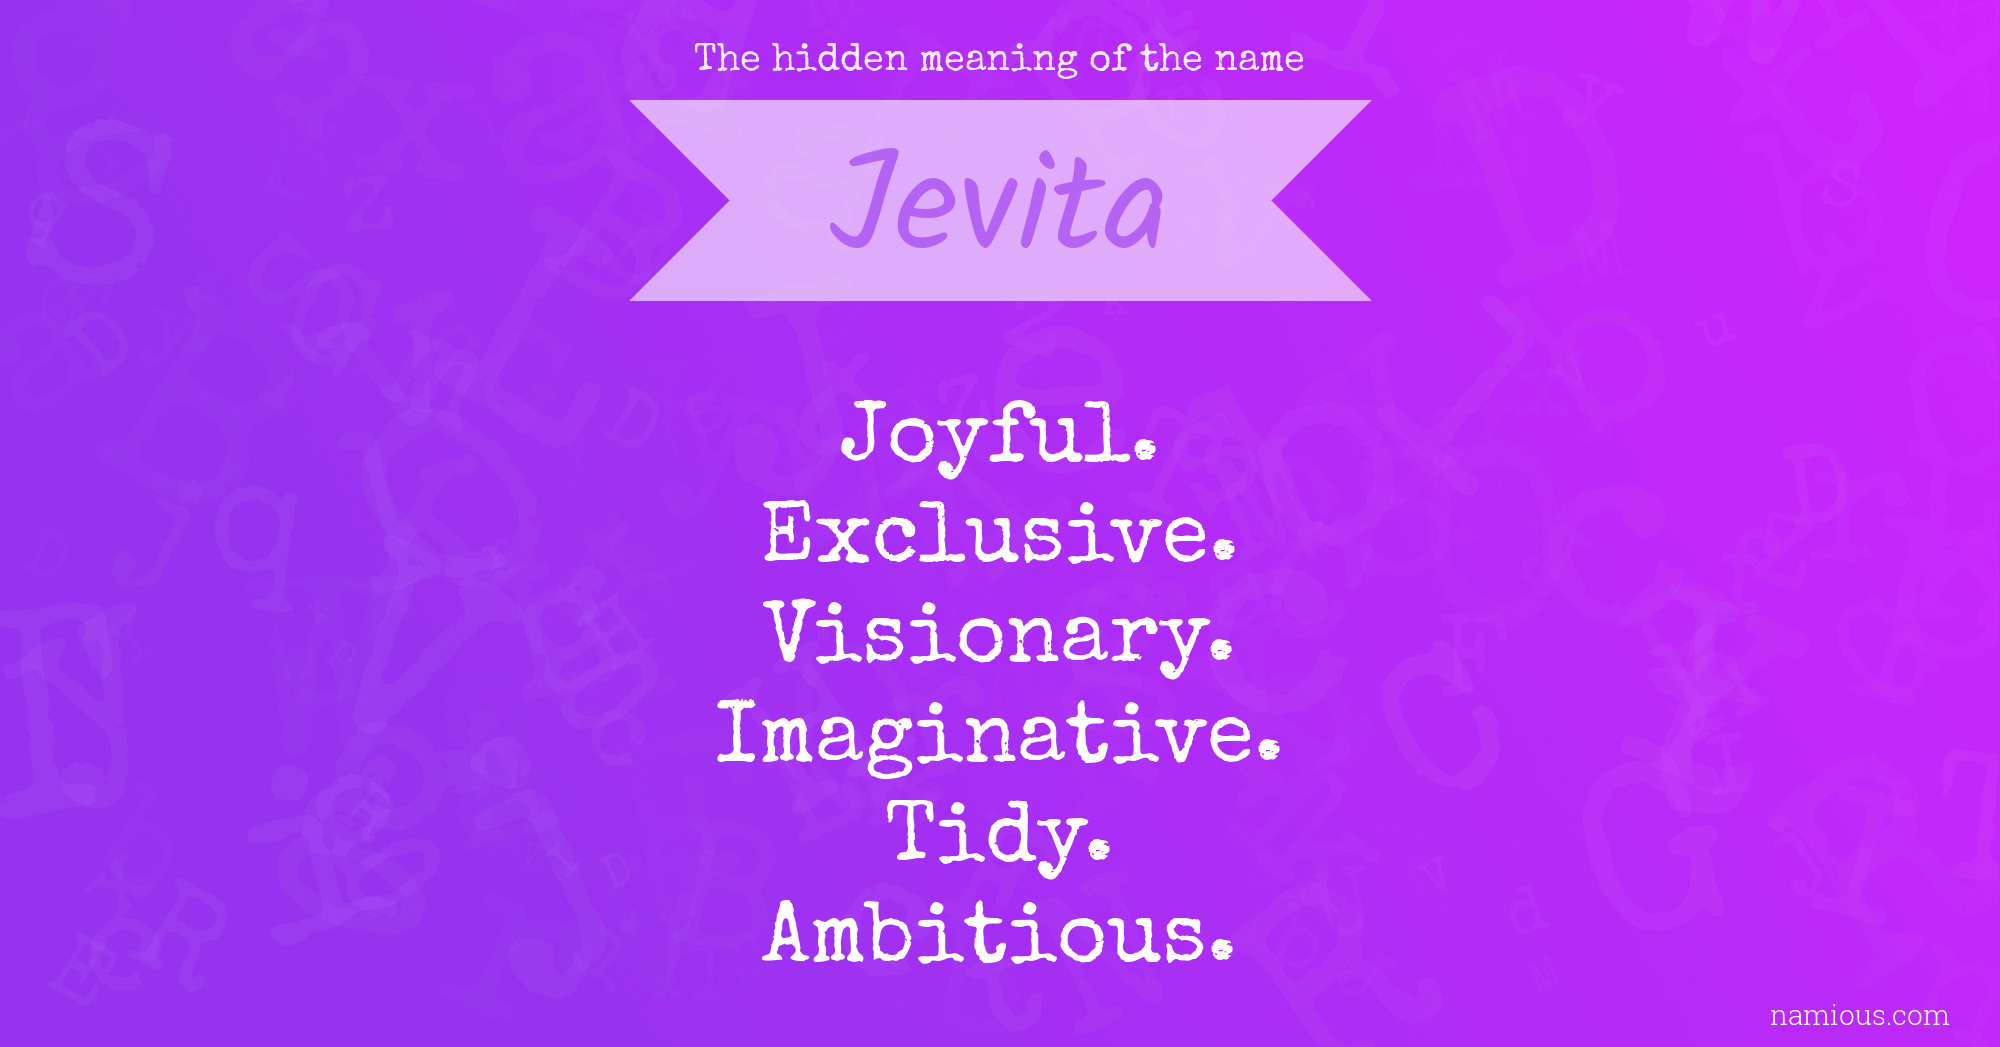 The hidden meaning of the name Jevita